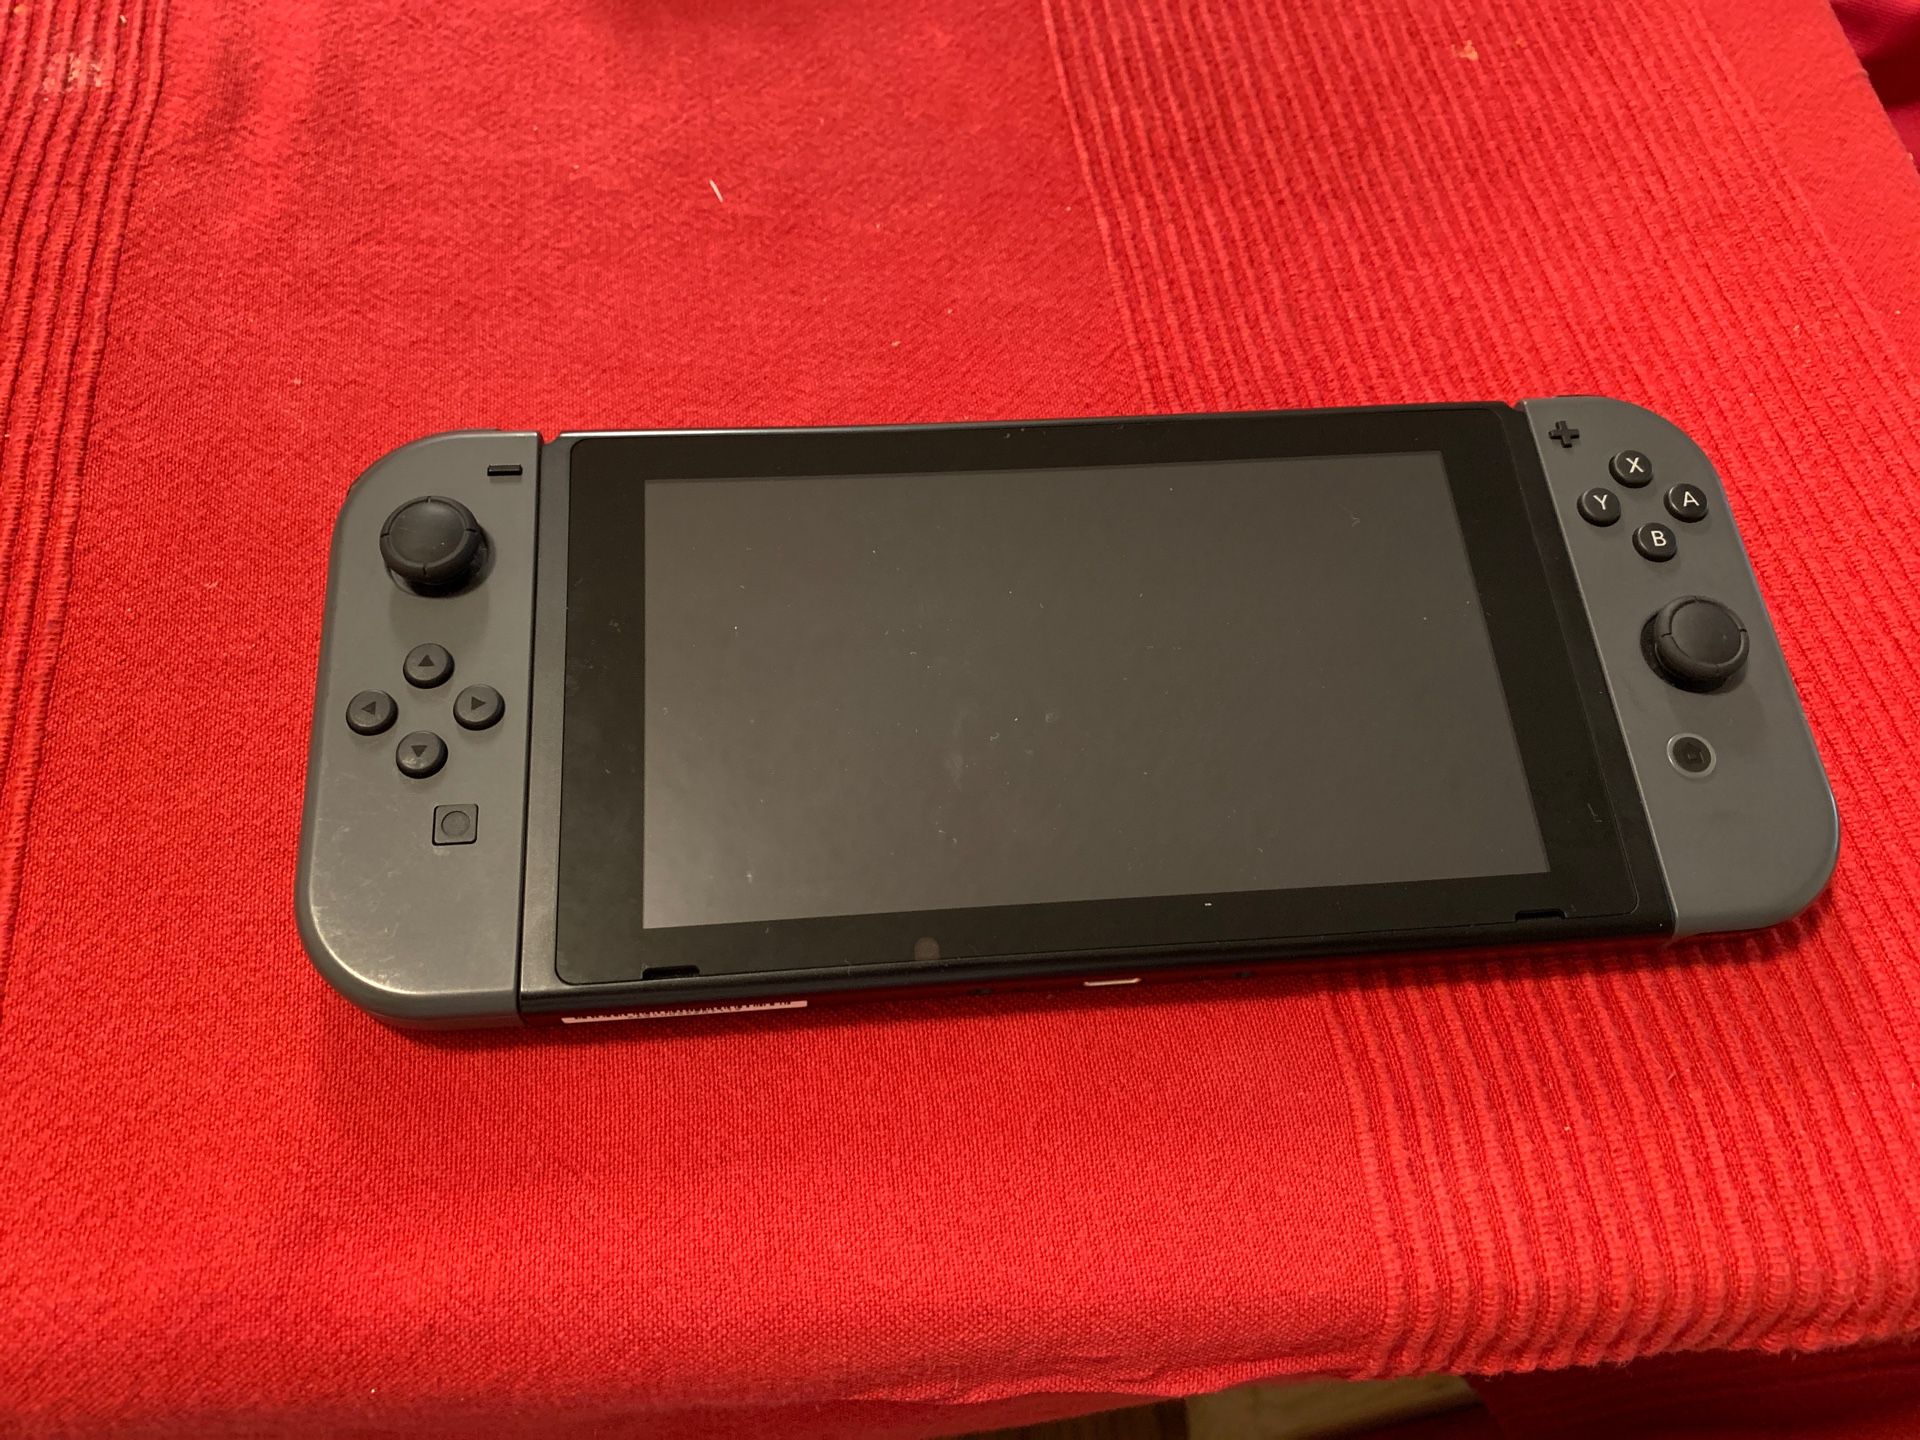 Nintendo Switch w/ Games and a 256GB memory card